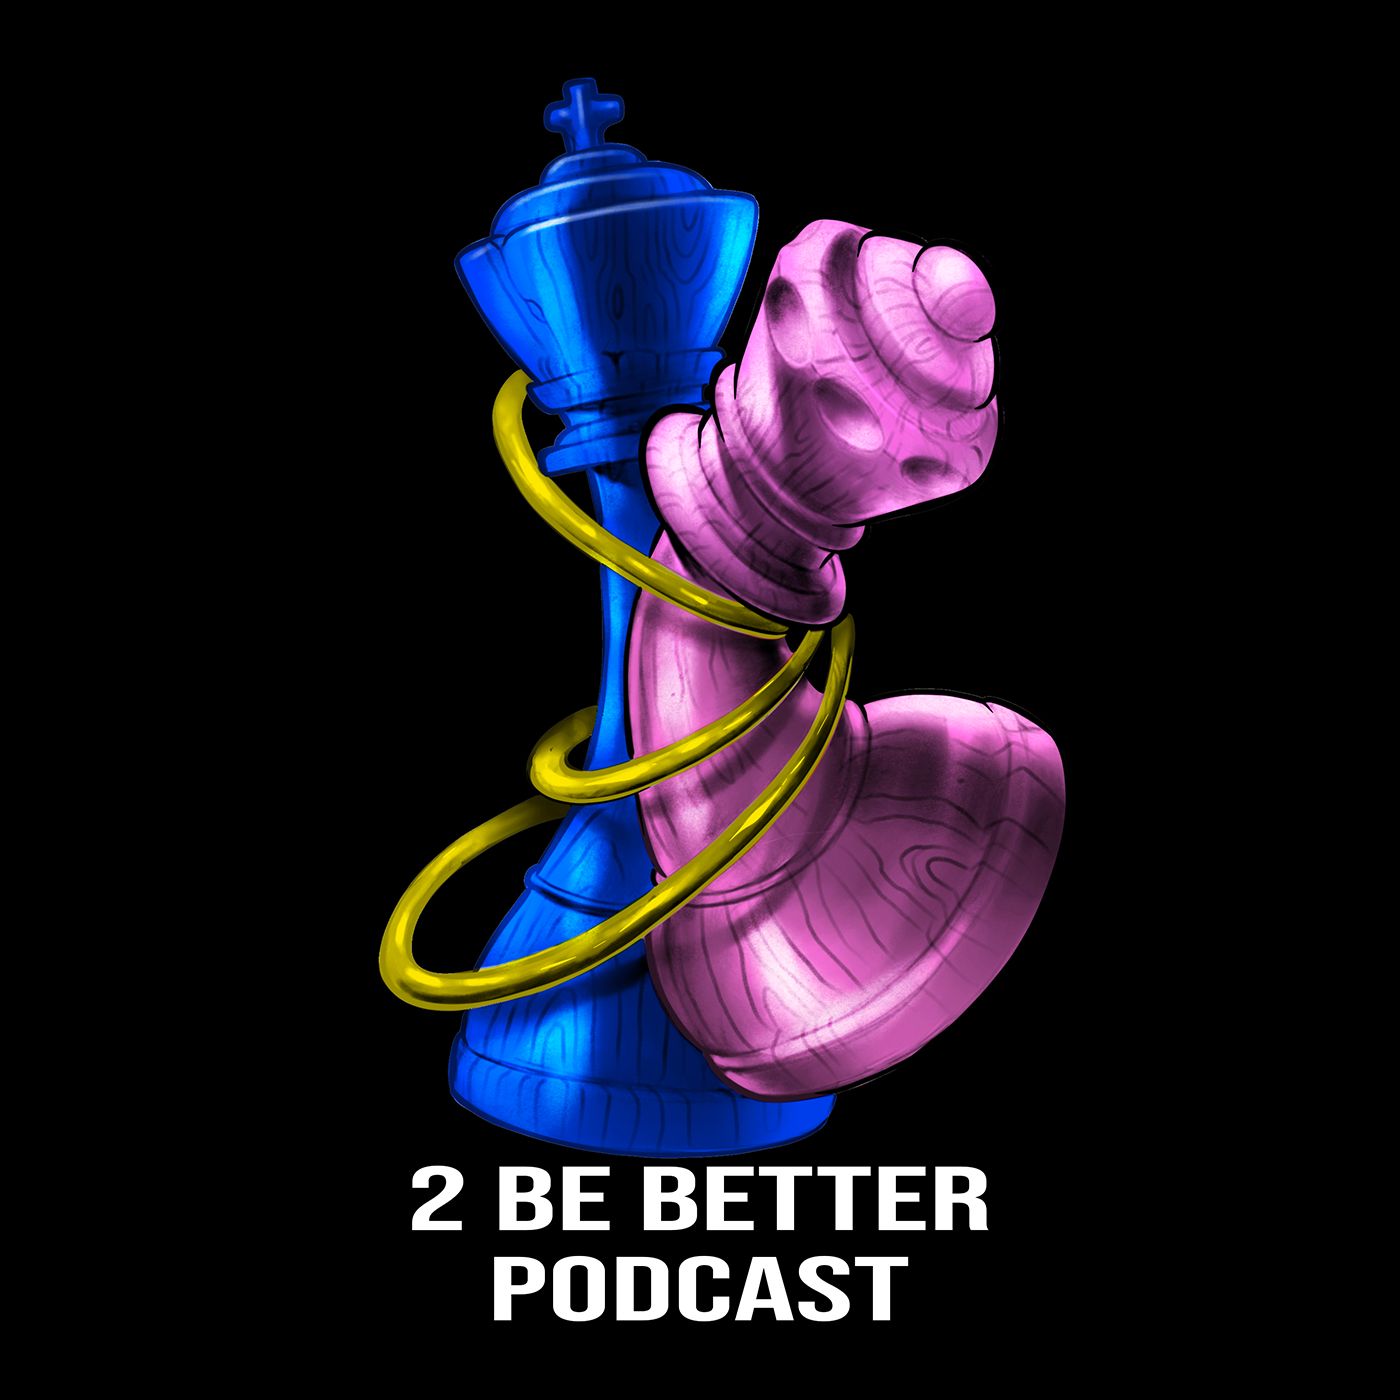 2 Be Better Ep. 35 Her side of the story